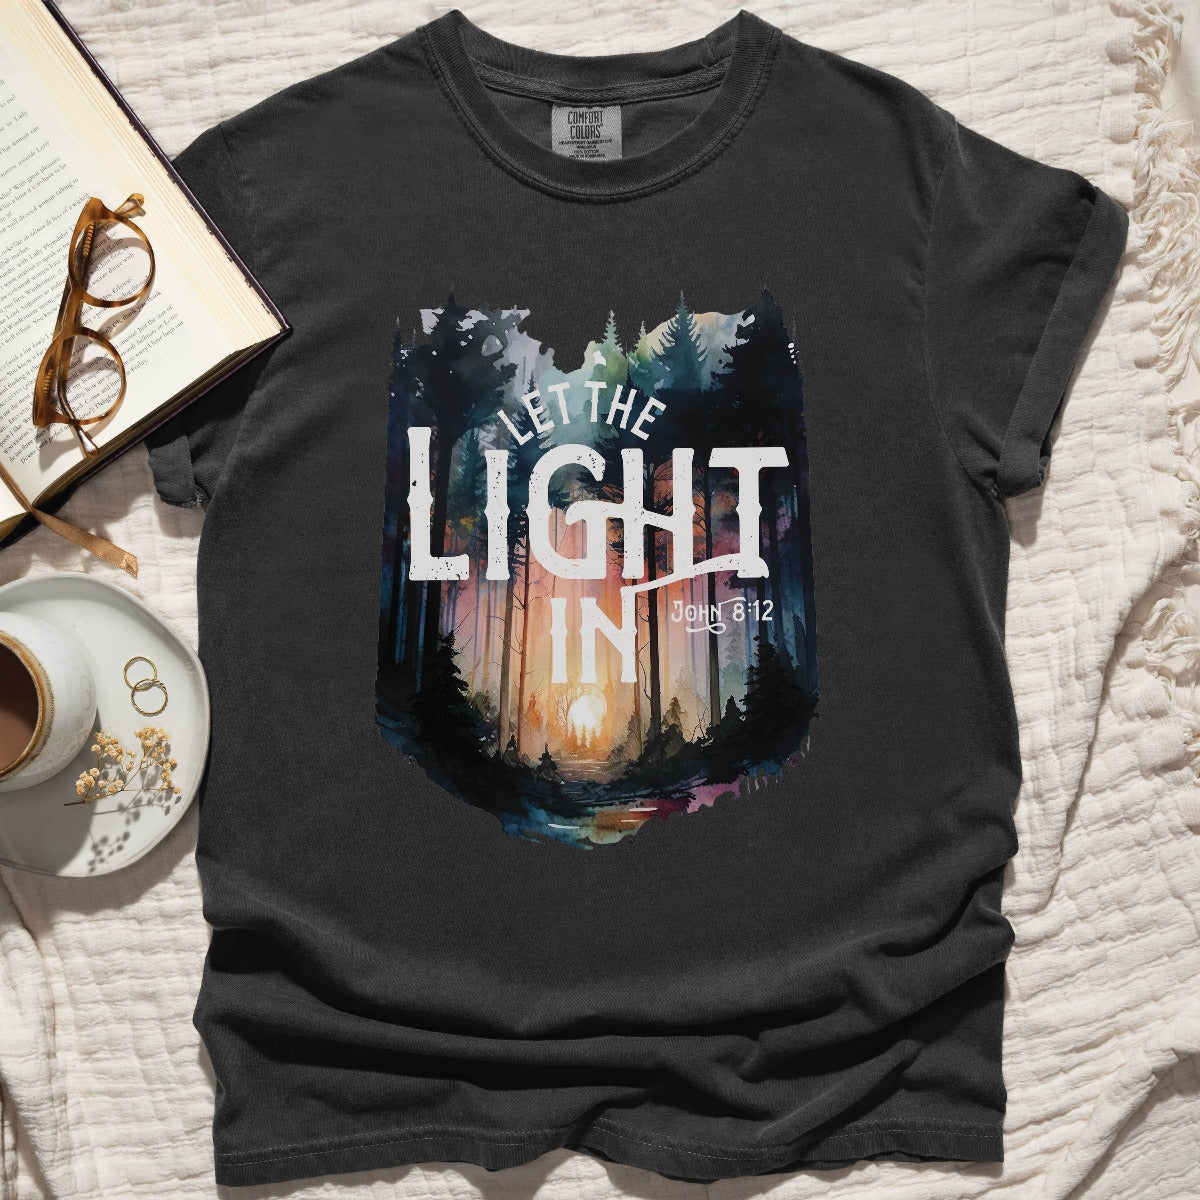 Pepper distressed black Comfort Colors C1717 unisex faith-based Christian t-shirt with "Let the Light In" John 8:12 bible verse and watercolor moody forest trees scene, designed for men and women